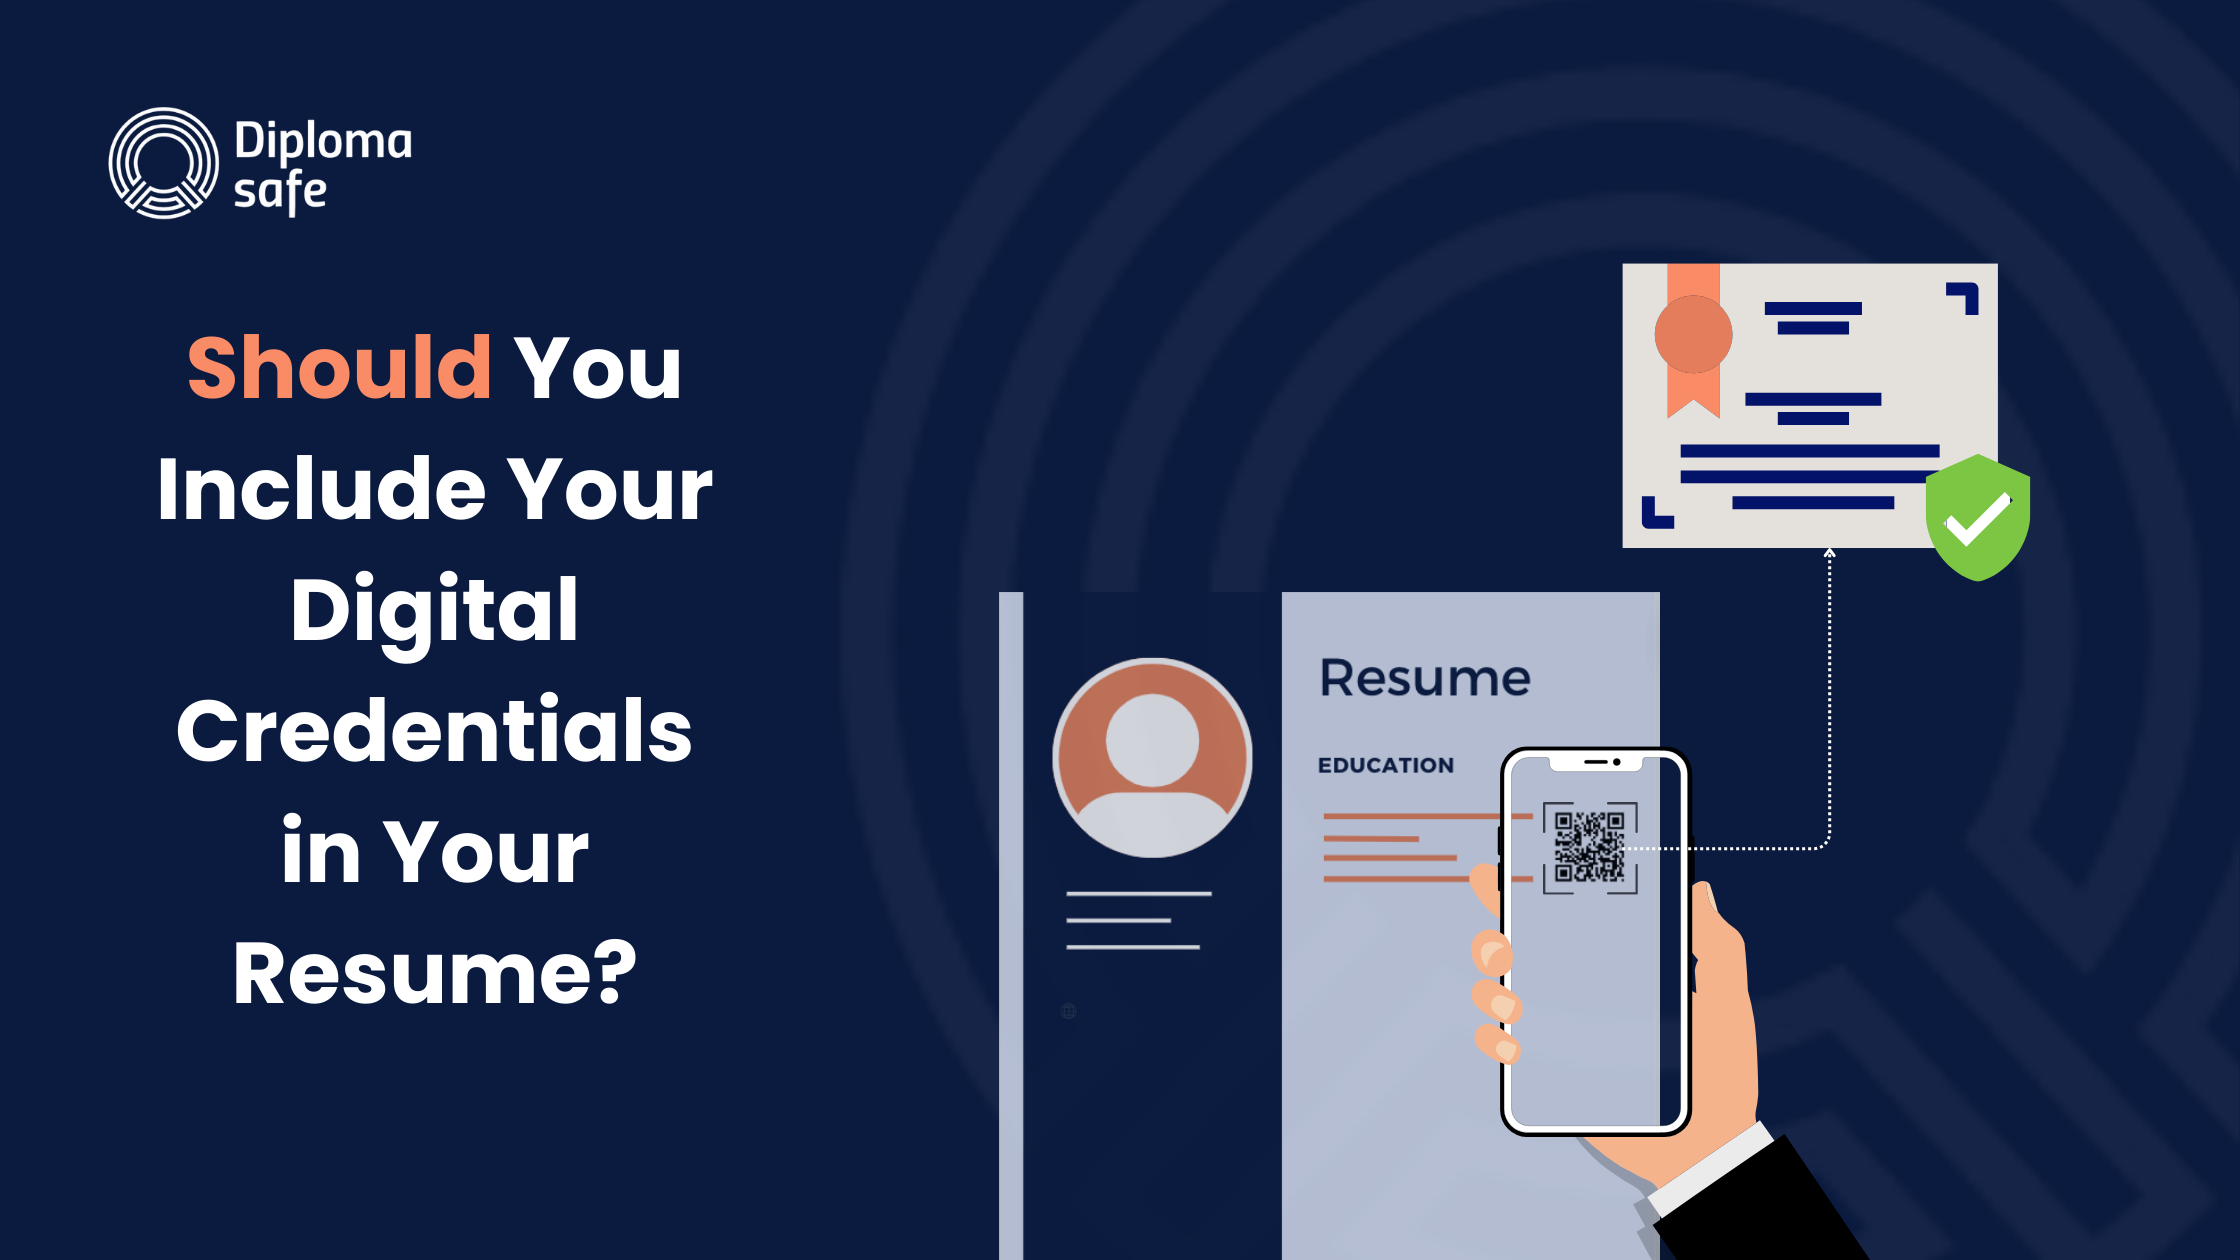 Should You Include Your Digital Credentials in Your Resume?